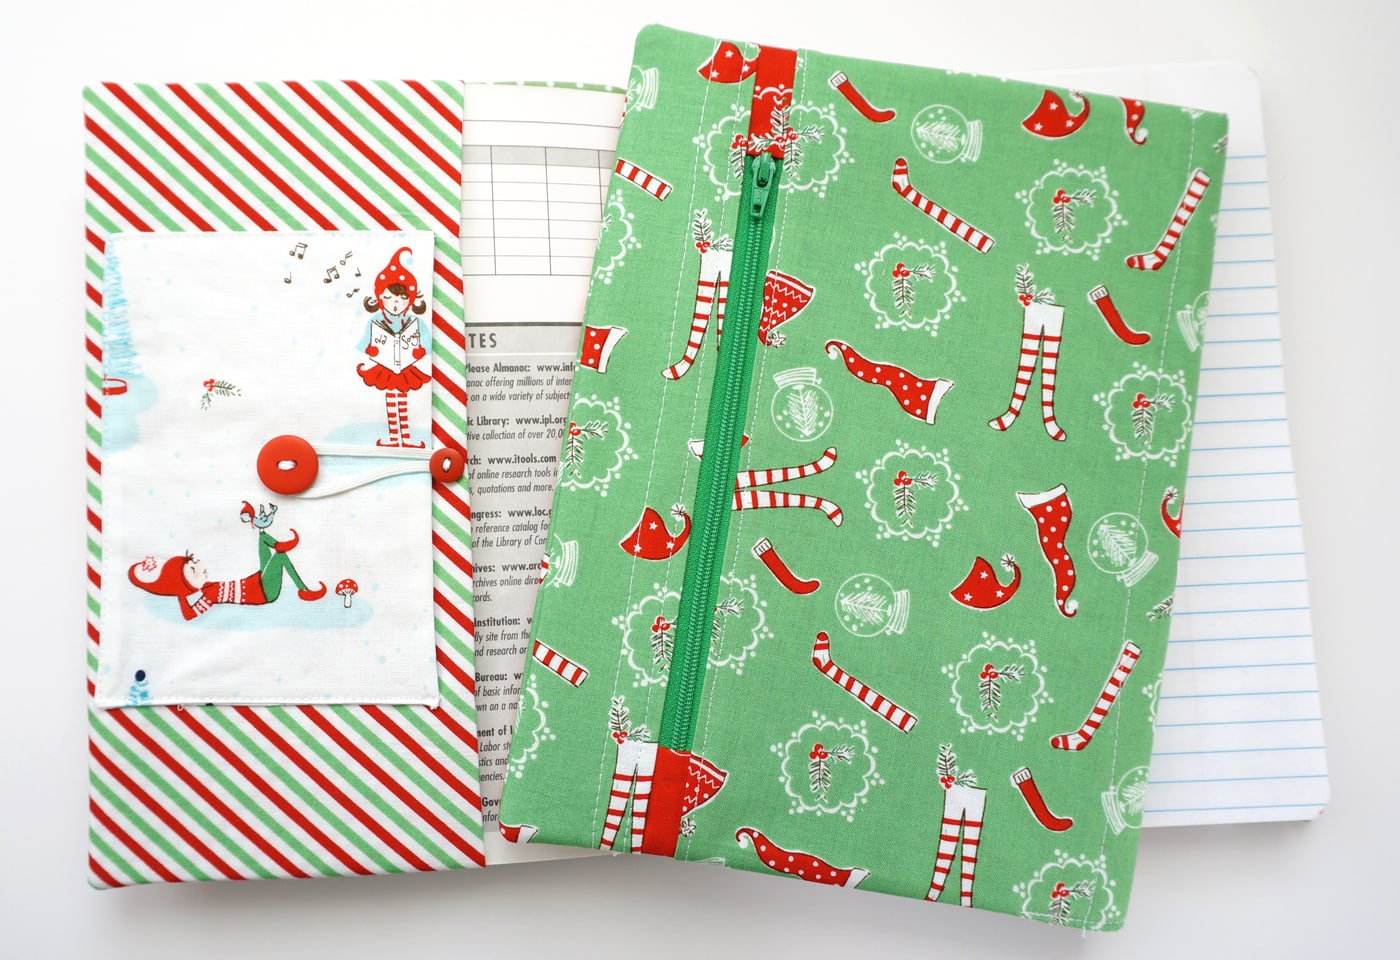 A free sewing tutorial for a Christmas Planner Cover - how to make a DIY Planner for Christmas - cute Christmas planners #Christmas #Planner #Planners #DIYPlanners #ChristmasPlanner #PlannerCover